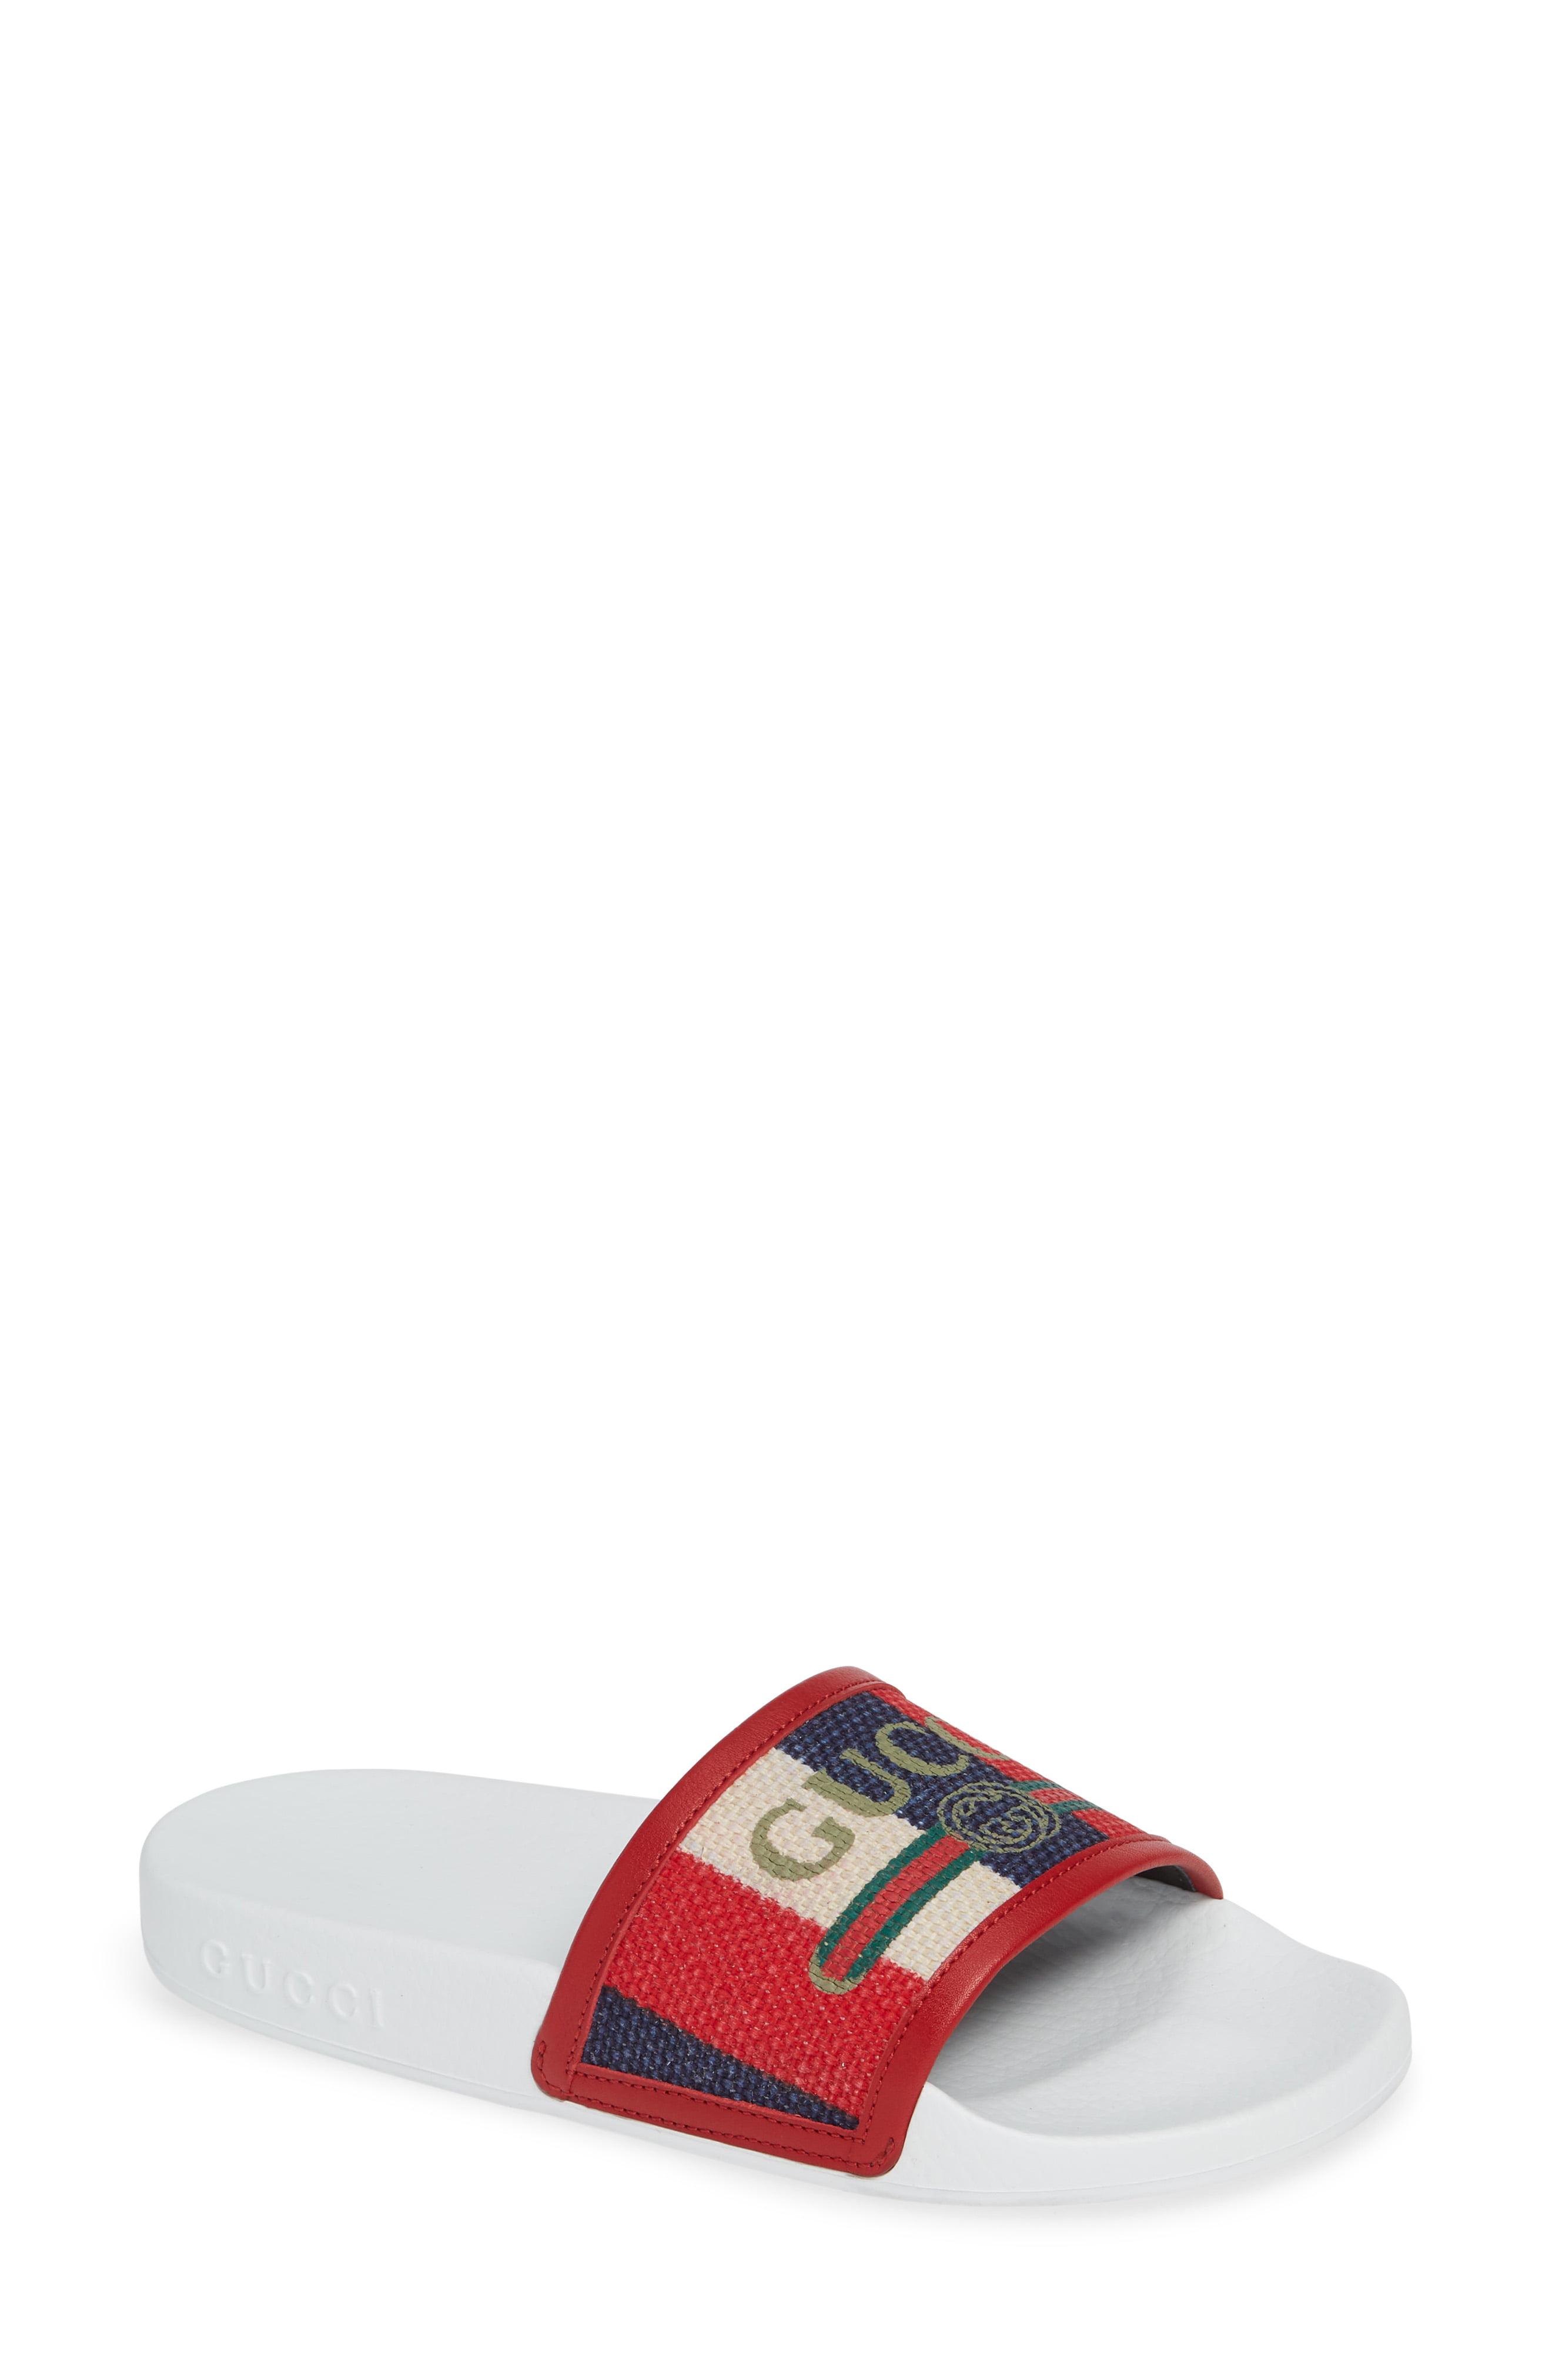 gucci red white and blue slides